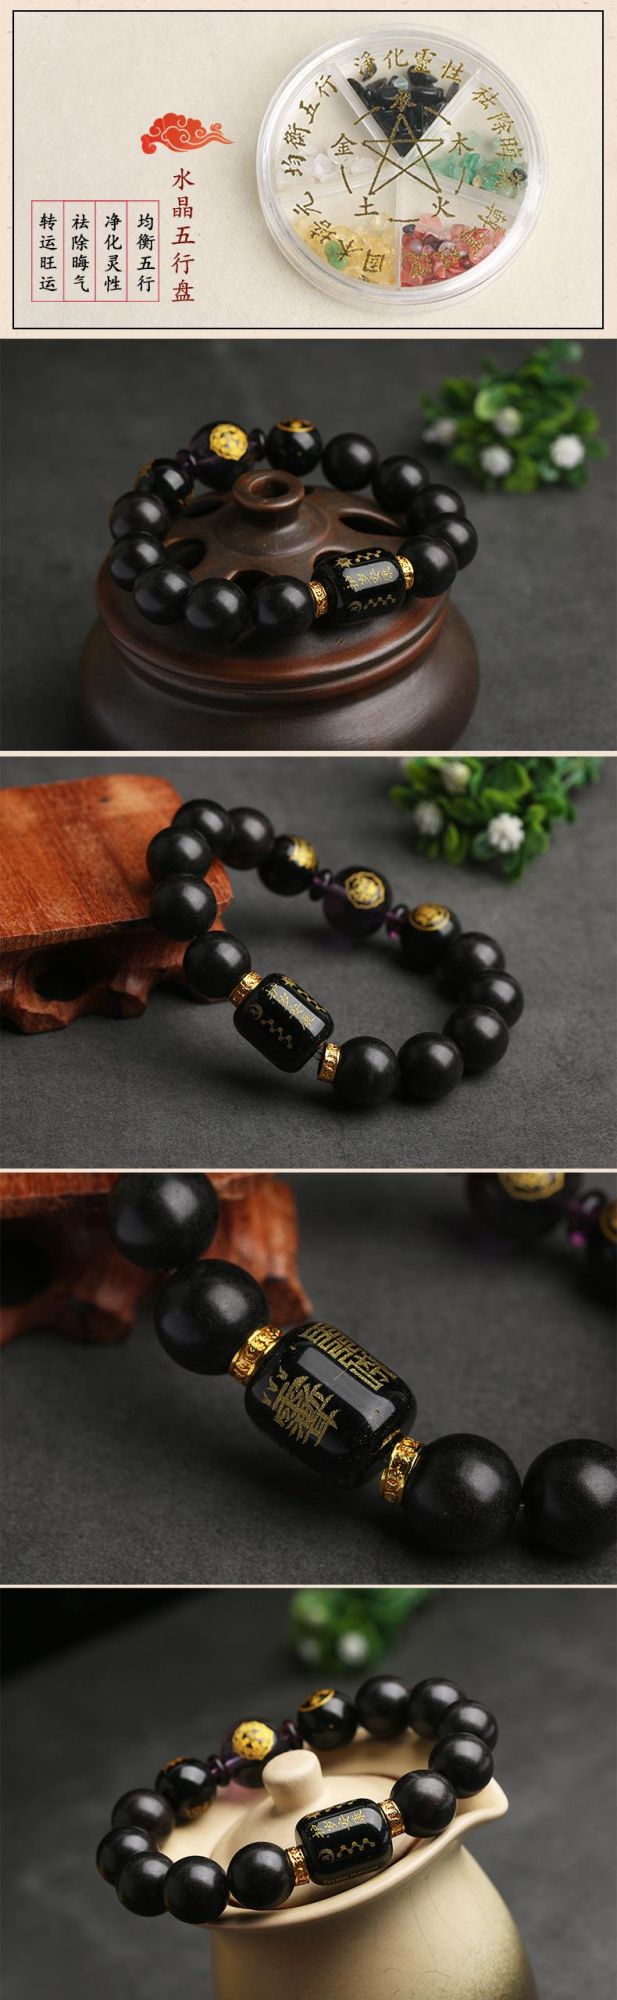 12 mm Wind Beads Bracelet Chinese Bracelet Hand-Carved Black Talisman Beads Bracelet to Attract Wealth and Good Luck